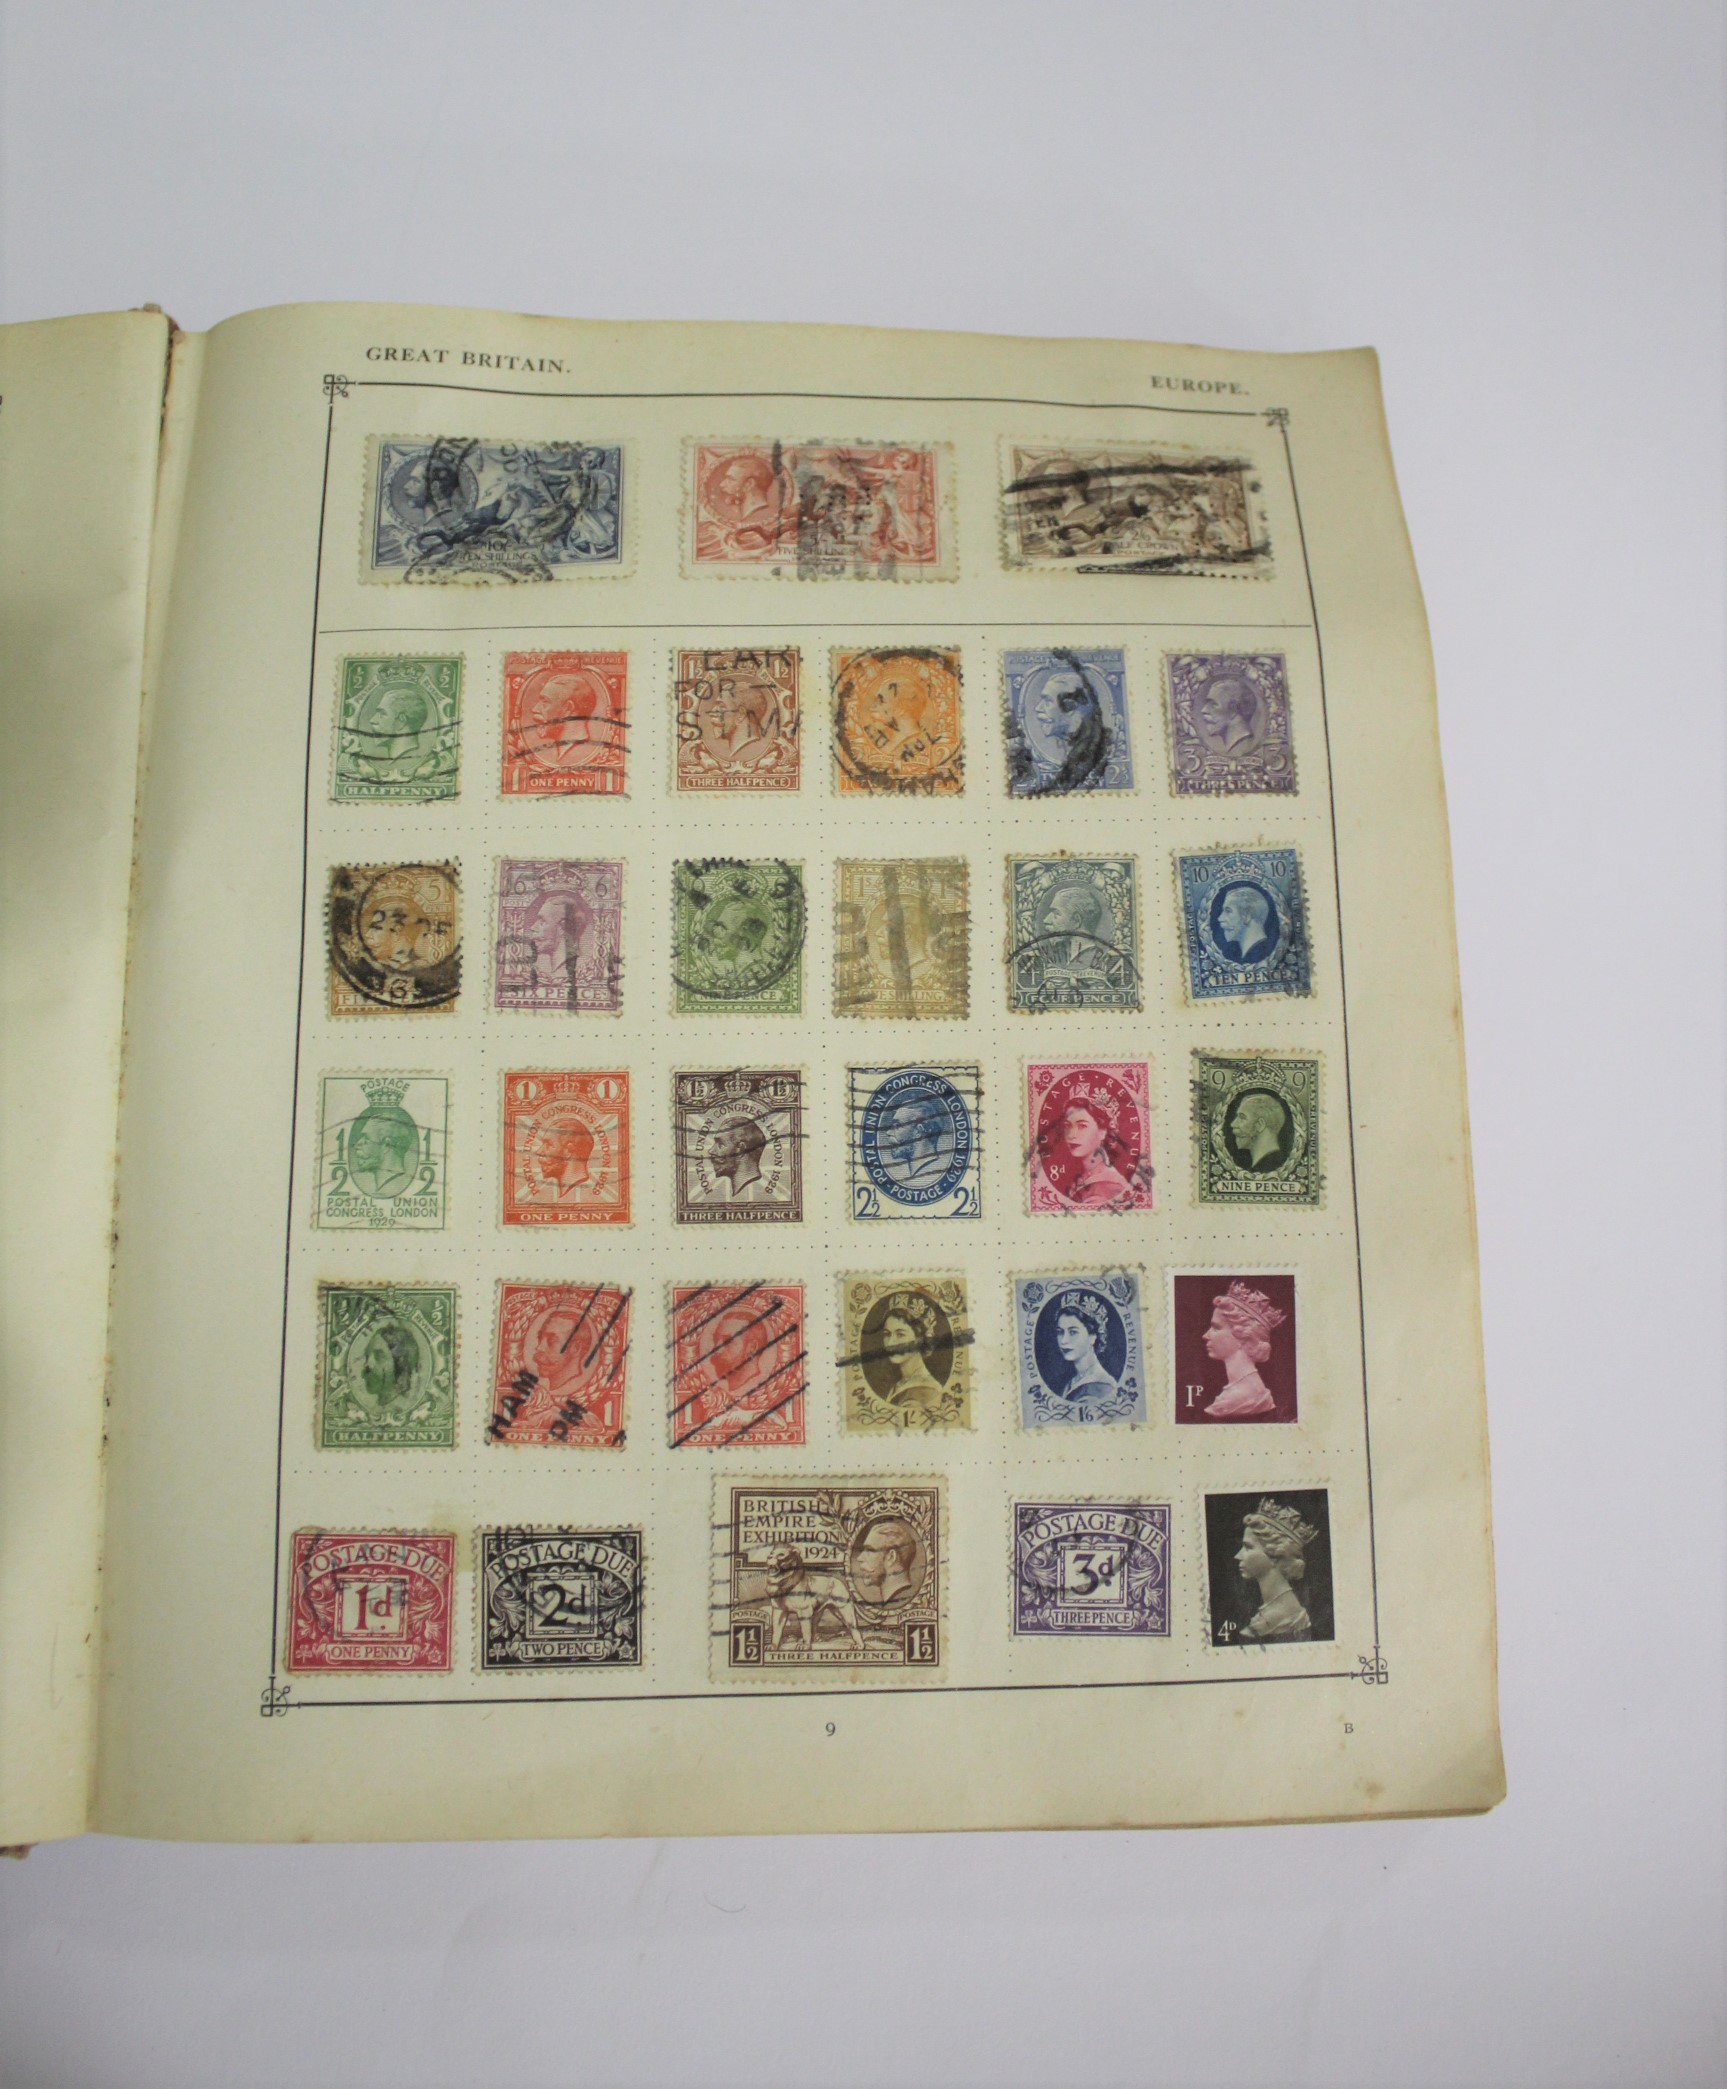 STAMP ALBUMS including 2 Strand albums (smaller album sparse), with GB content including used 2d